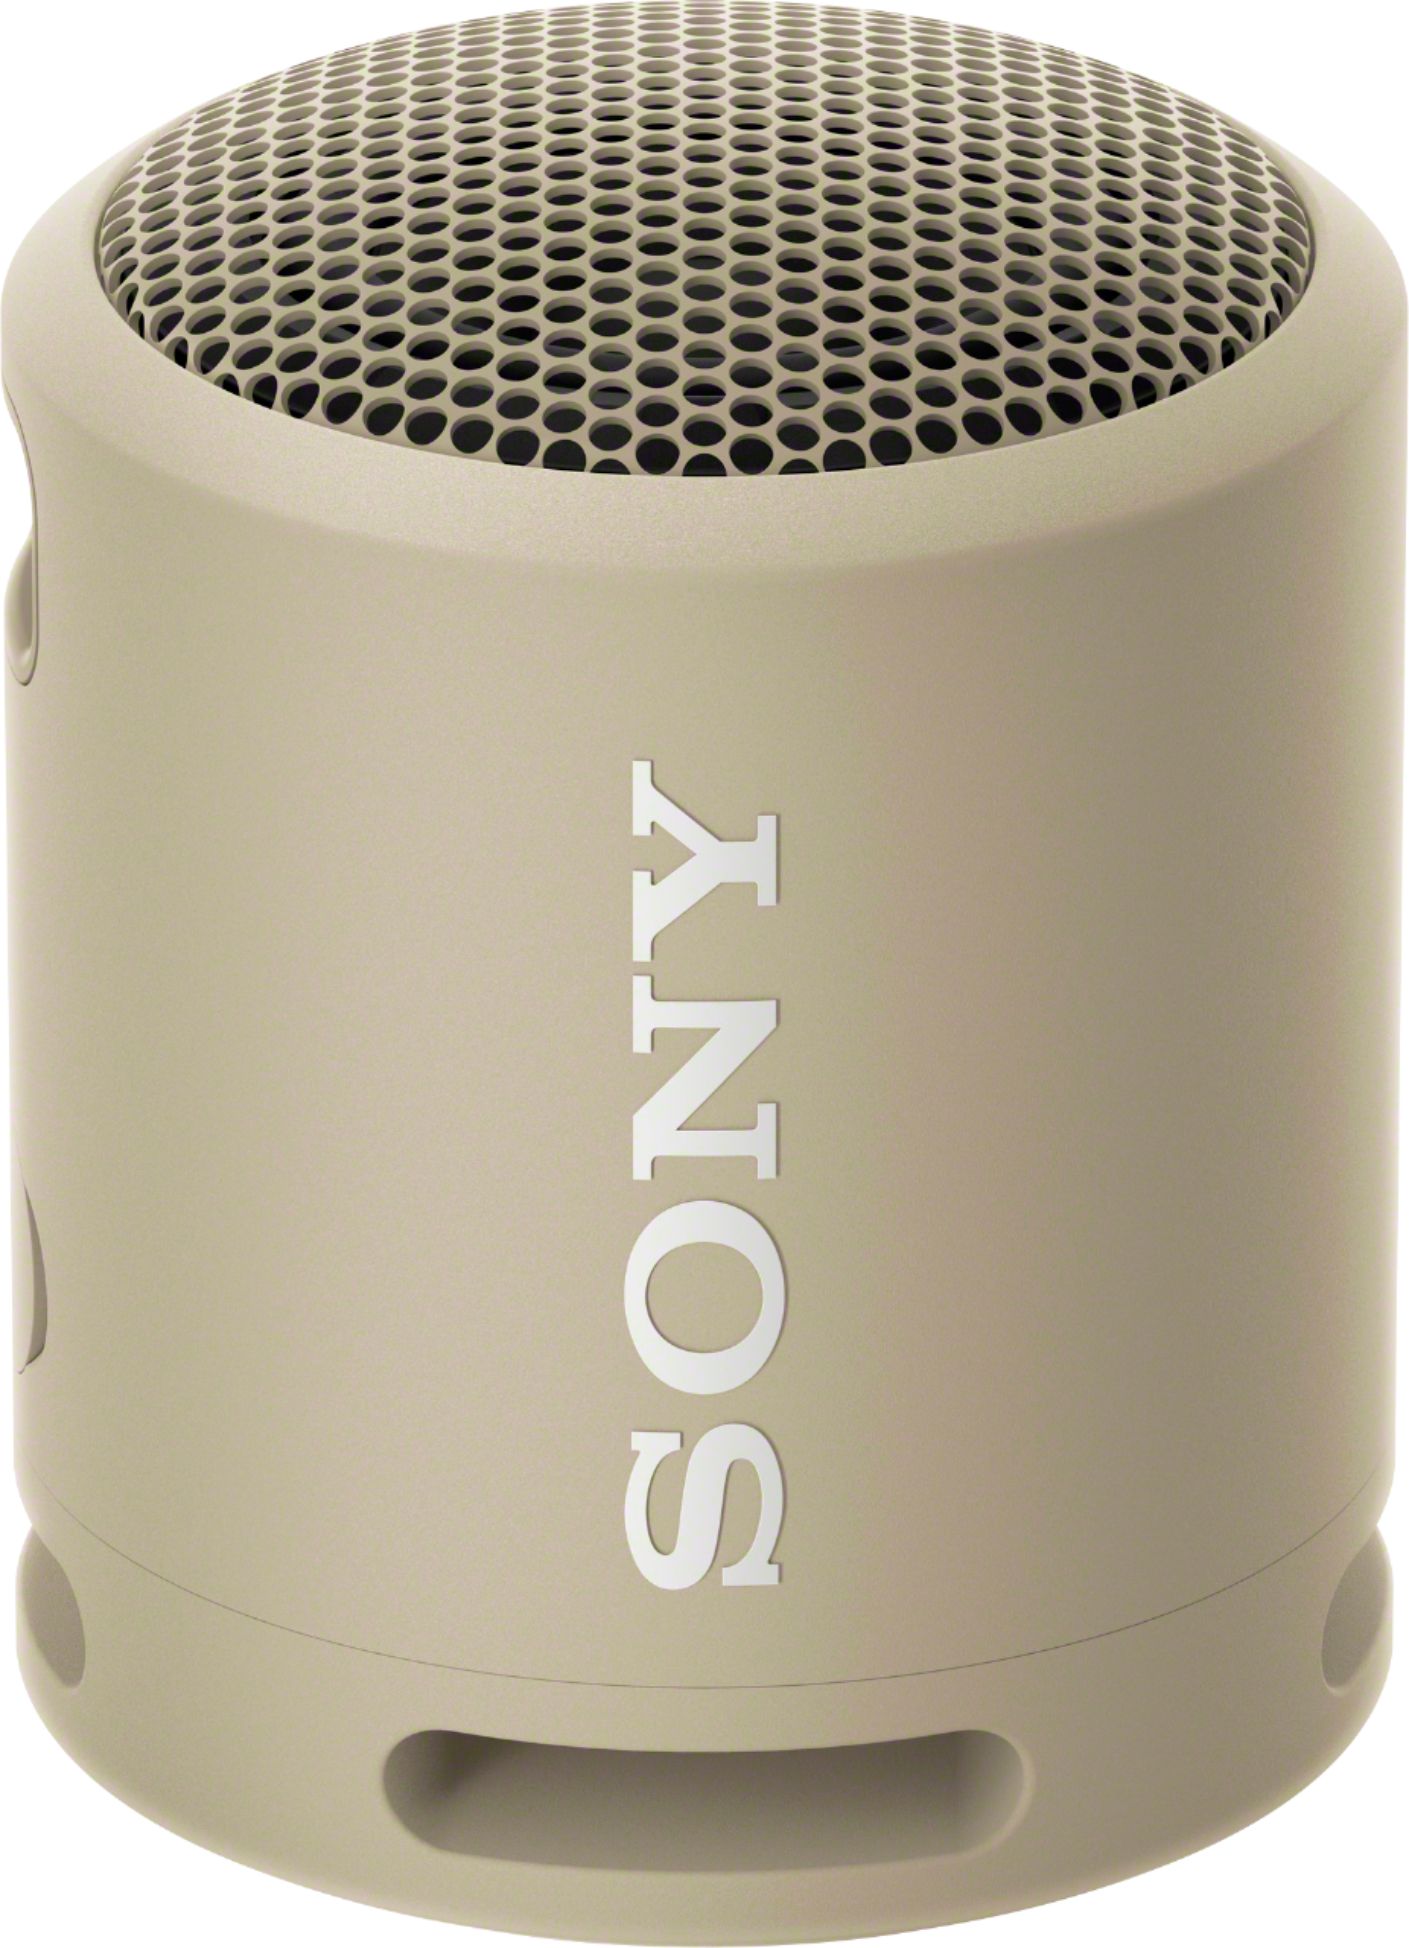 Bluetooth Sony Taupe Compact EXTRA Speaker SRSXB13/C Best BASS Buy: Portable